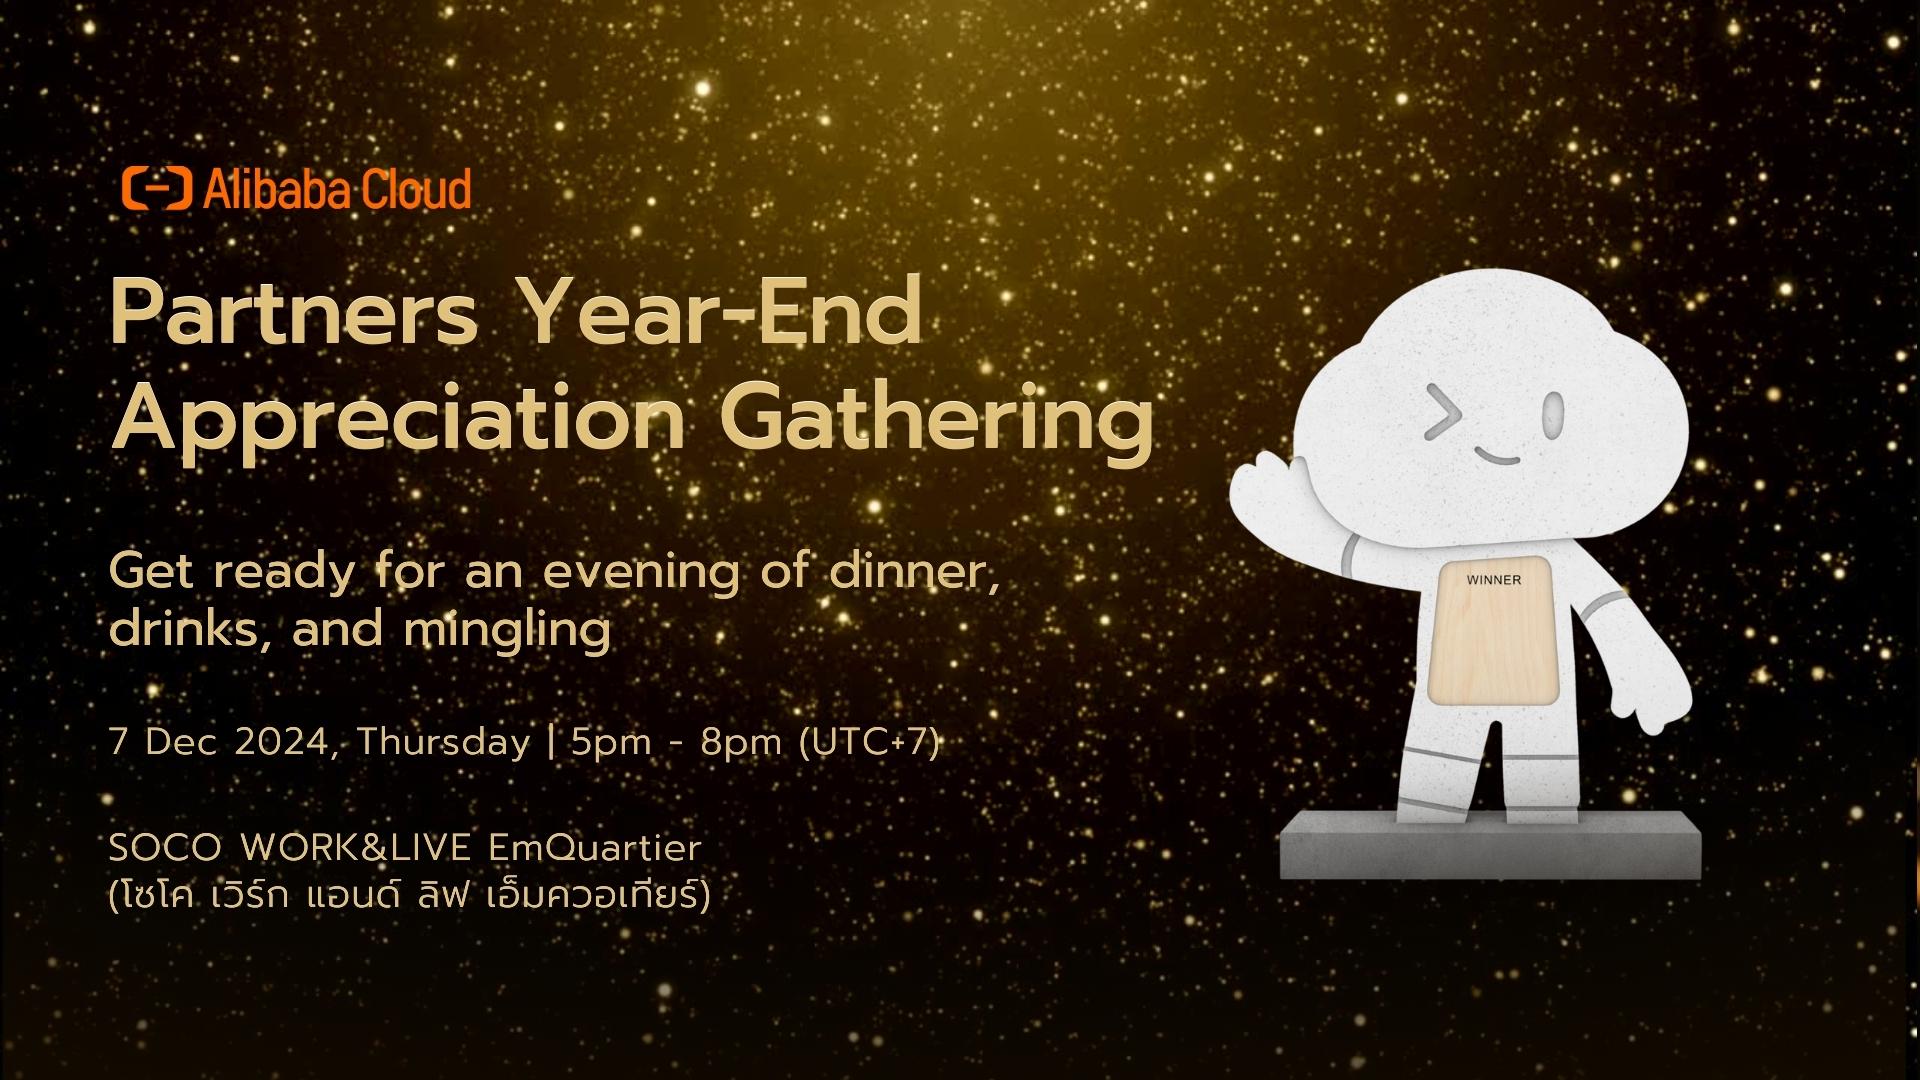 Alibaba Cloud Thailand's Partners Year-End Celebration